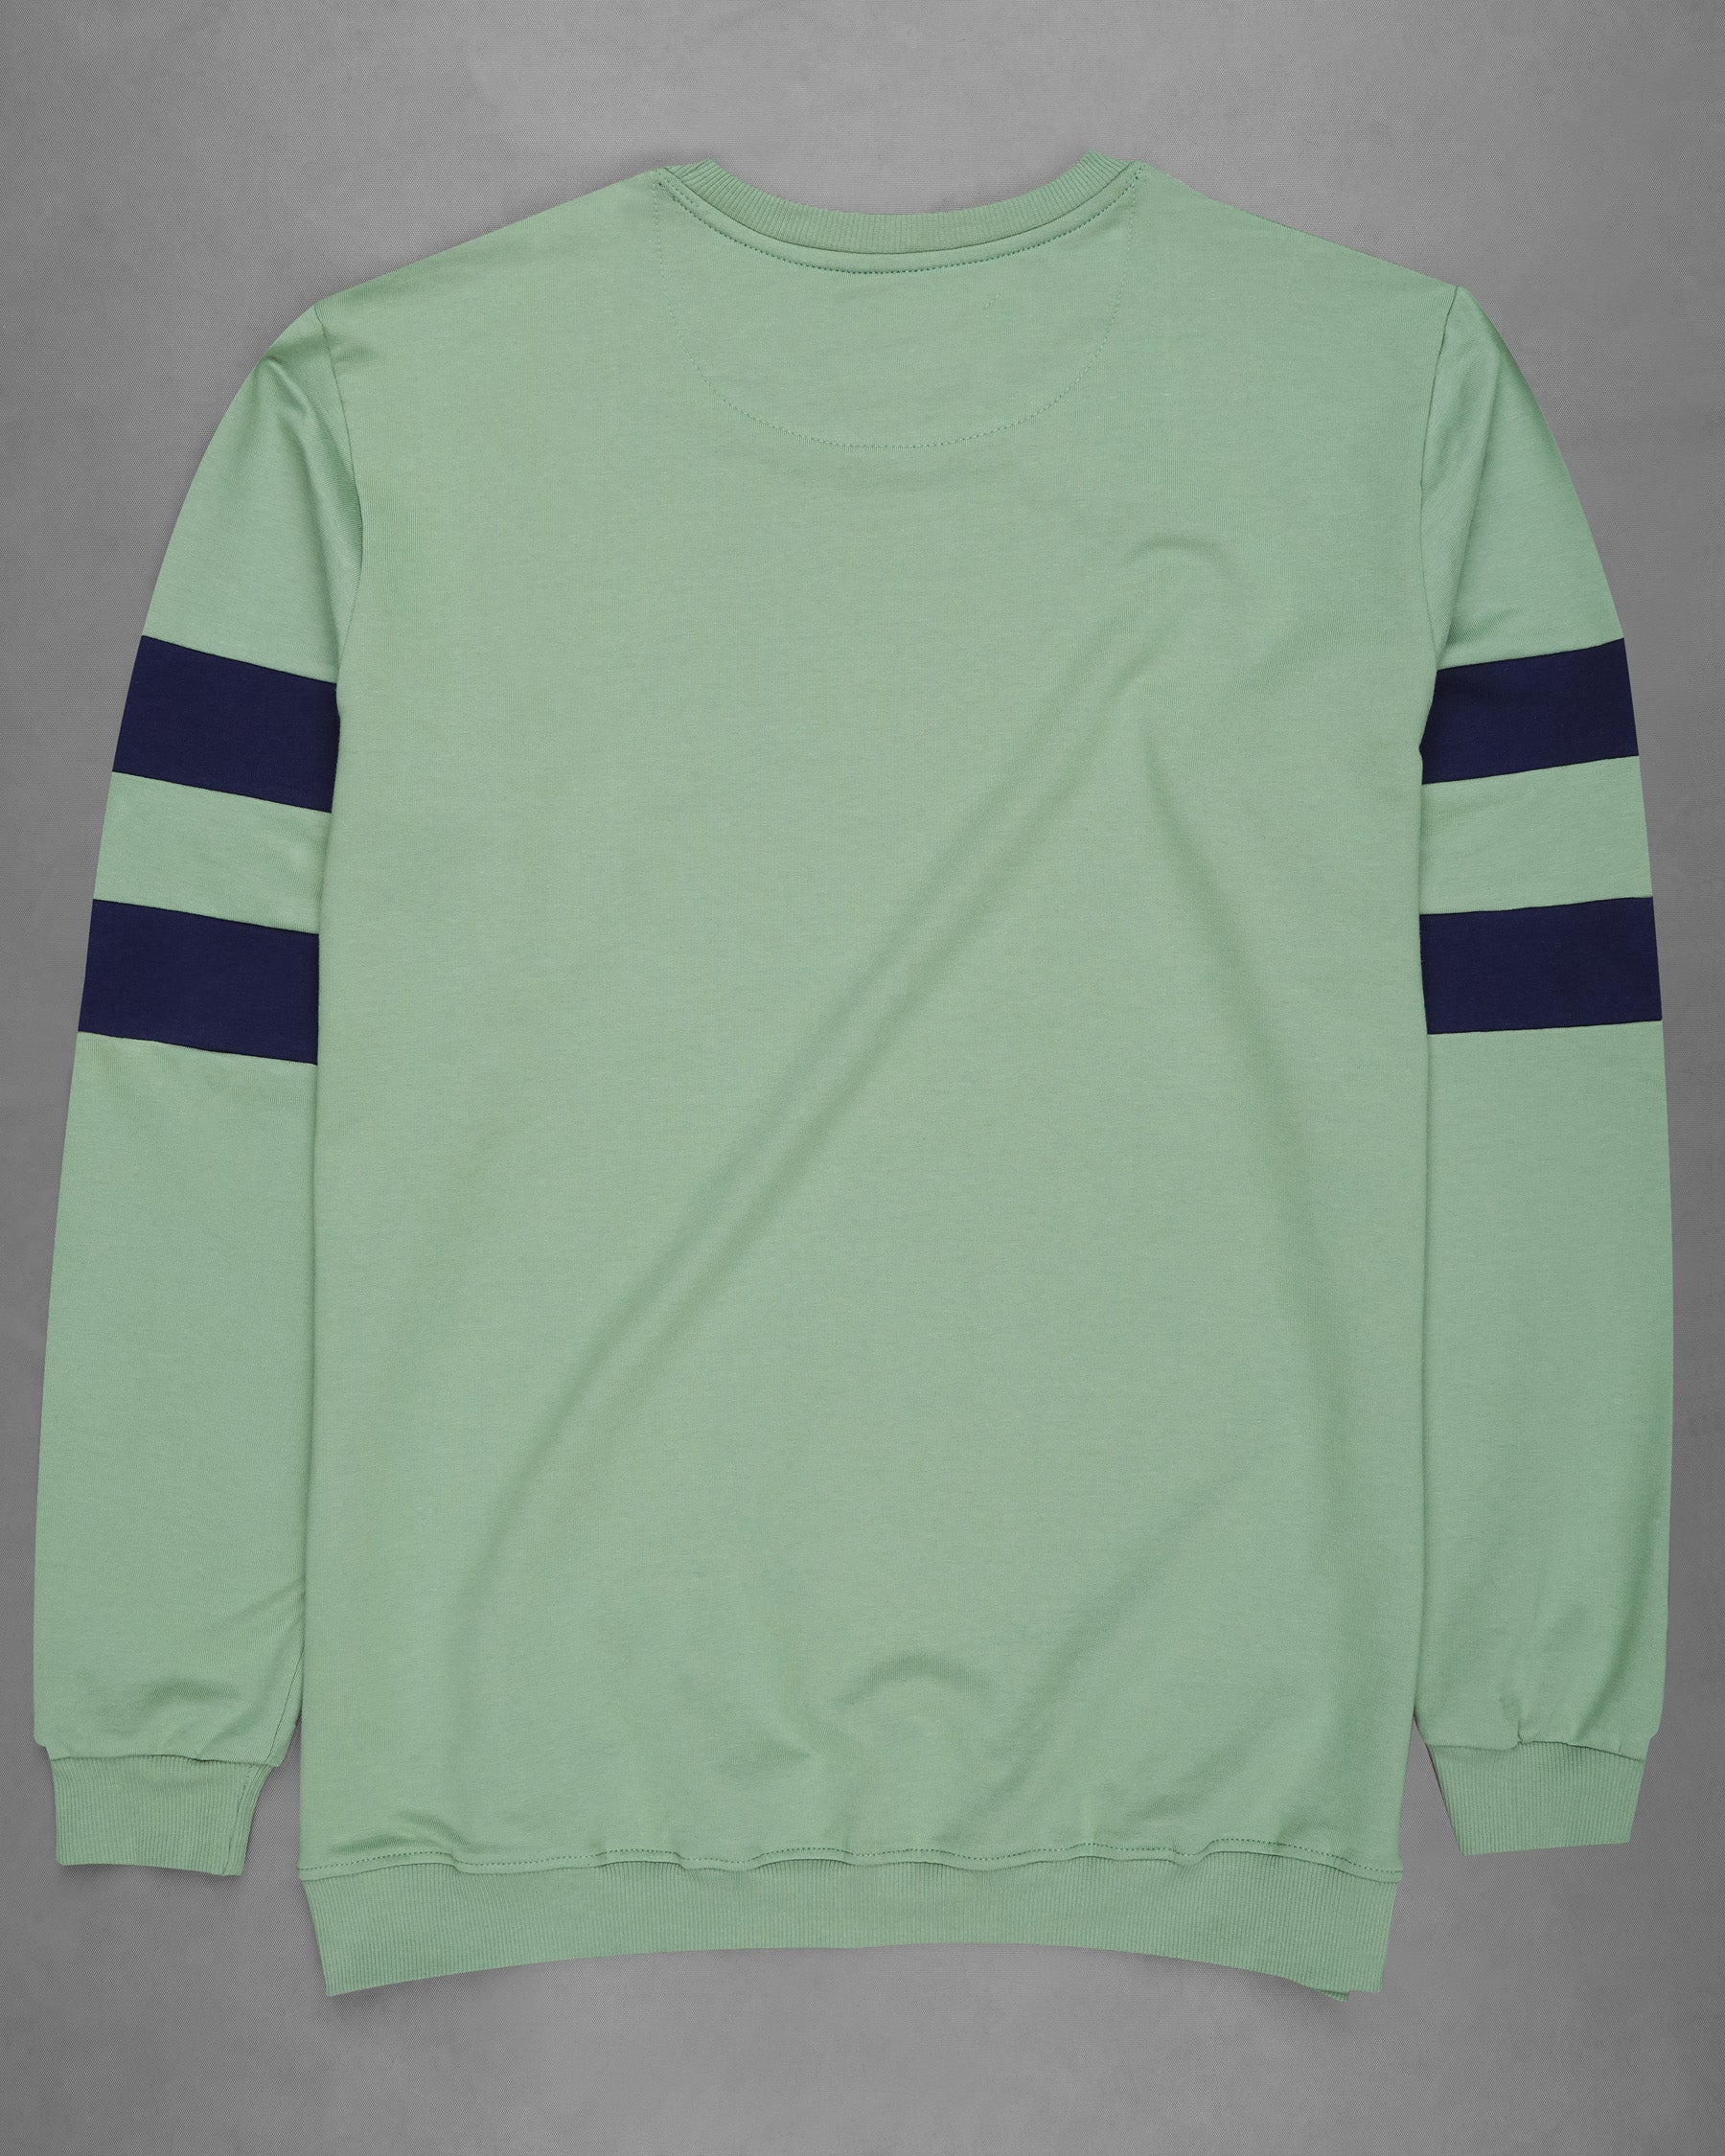 Cascade Green with Navy Blue Patch Worked Sweatshirt TS583-S, TS583-M, TS583-L, TS583-XL, TS583-XXL, TS583-3XL, TS583-4XL